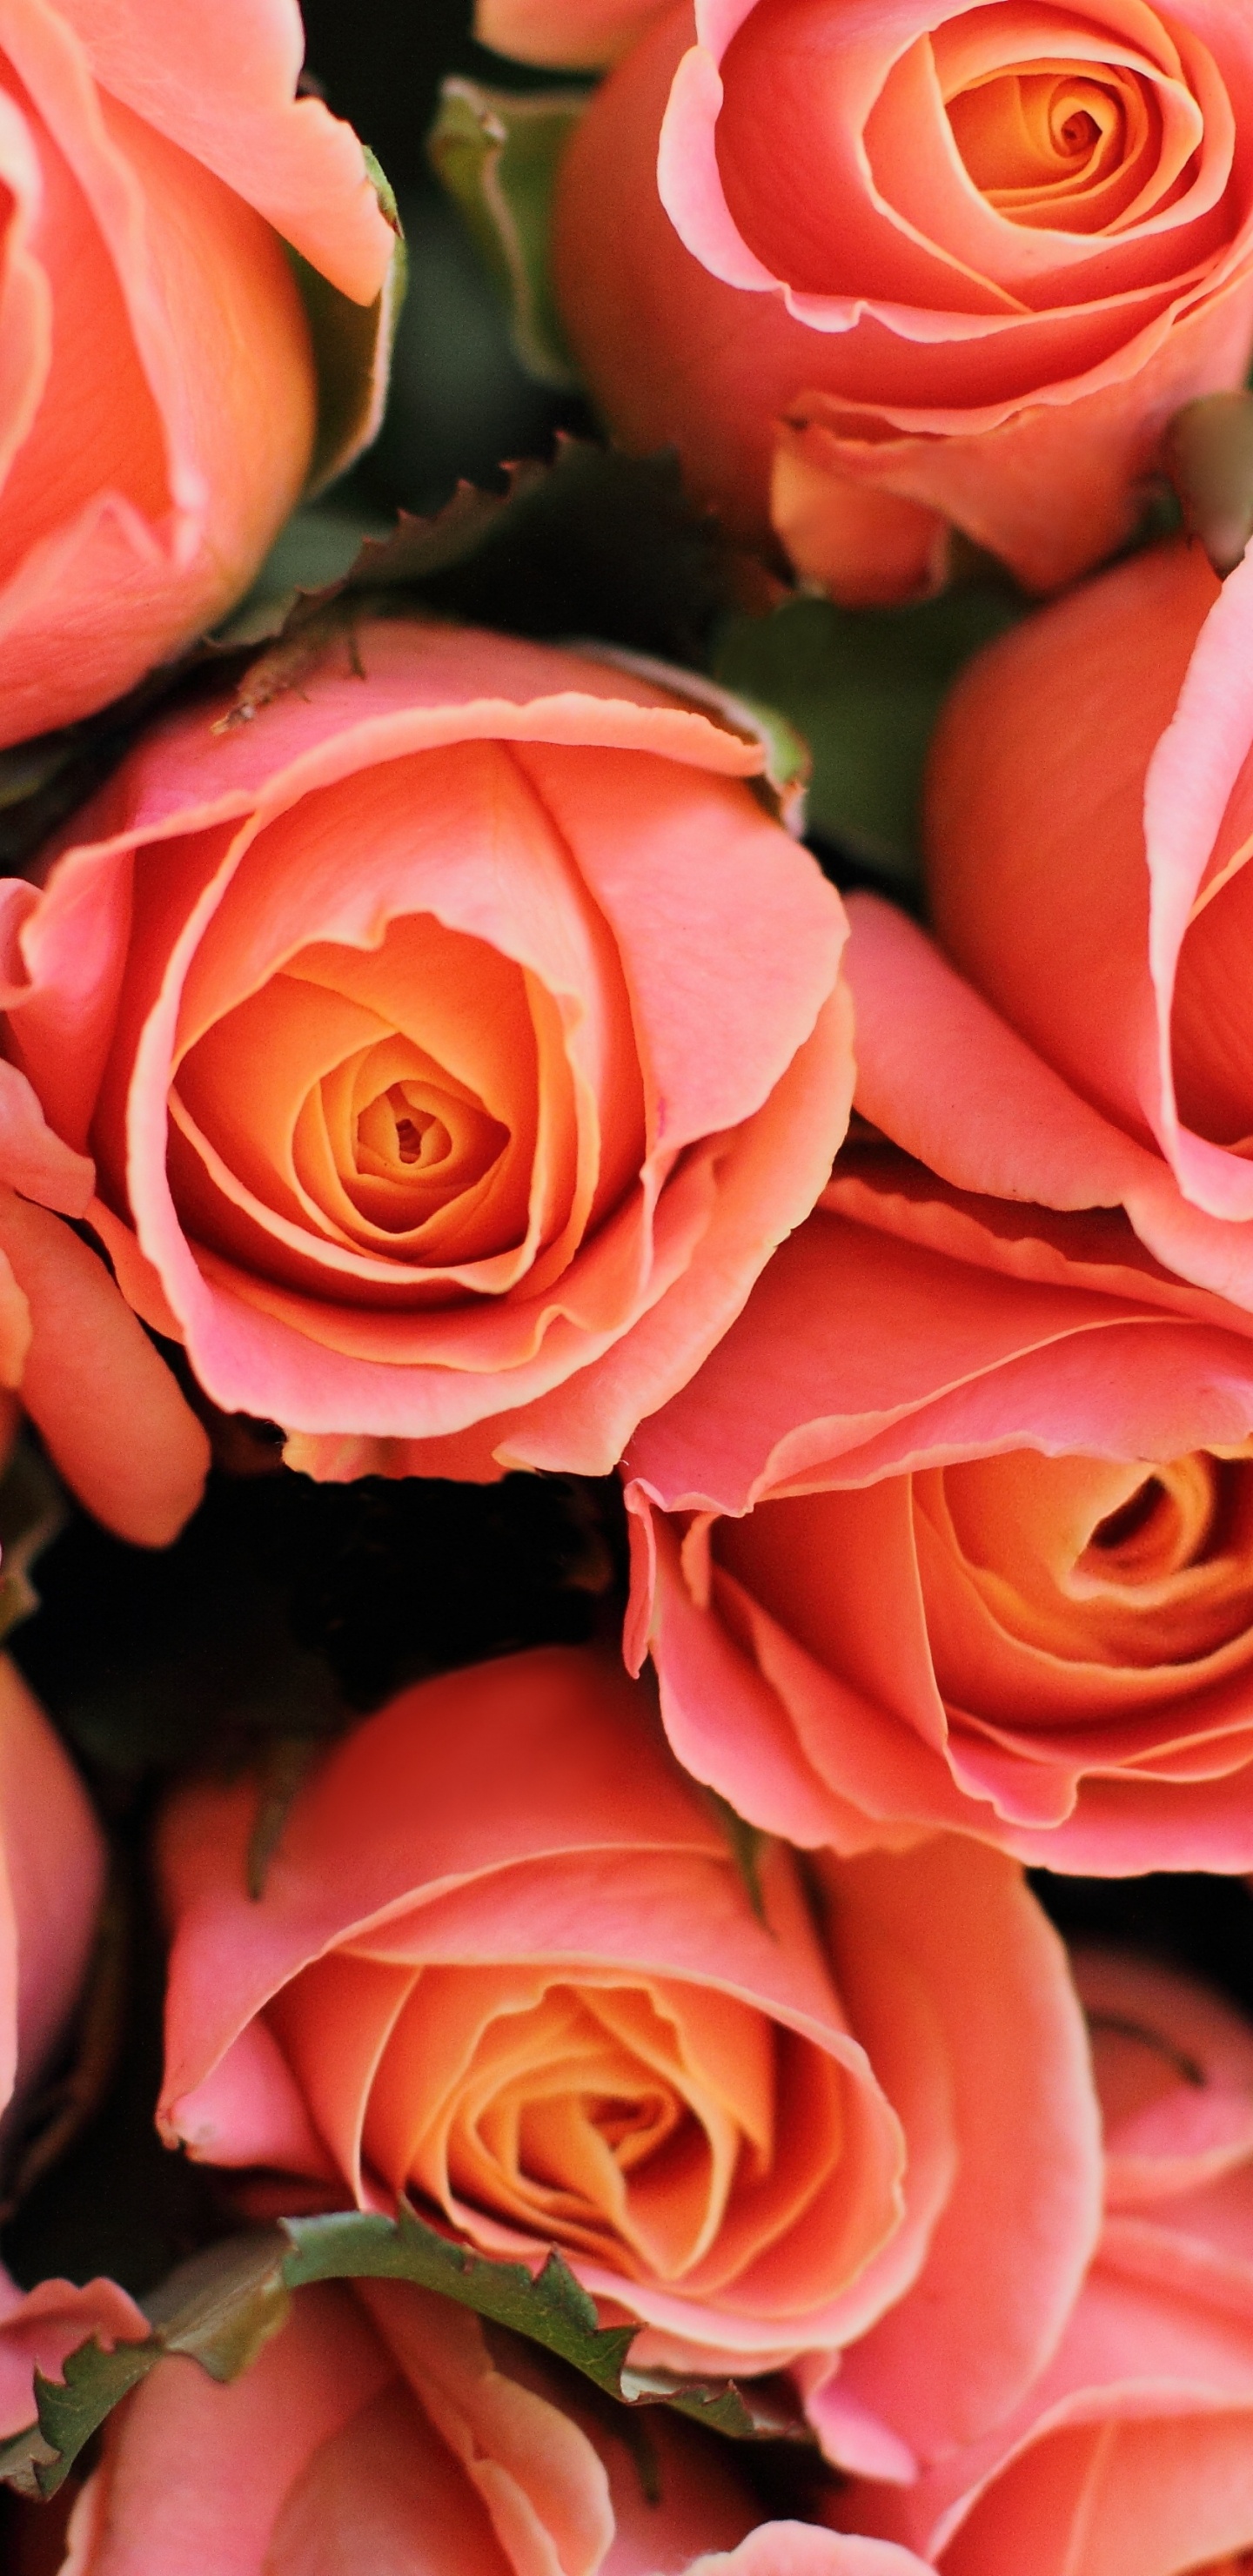 Pink Roses in Close up Photography. Wallpaper in 1440x2960 Resolution